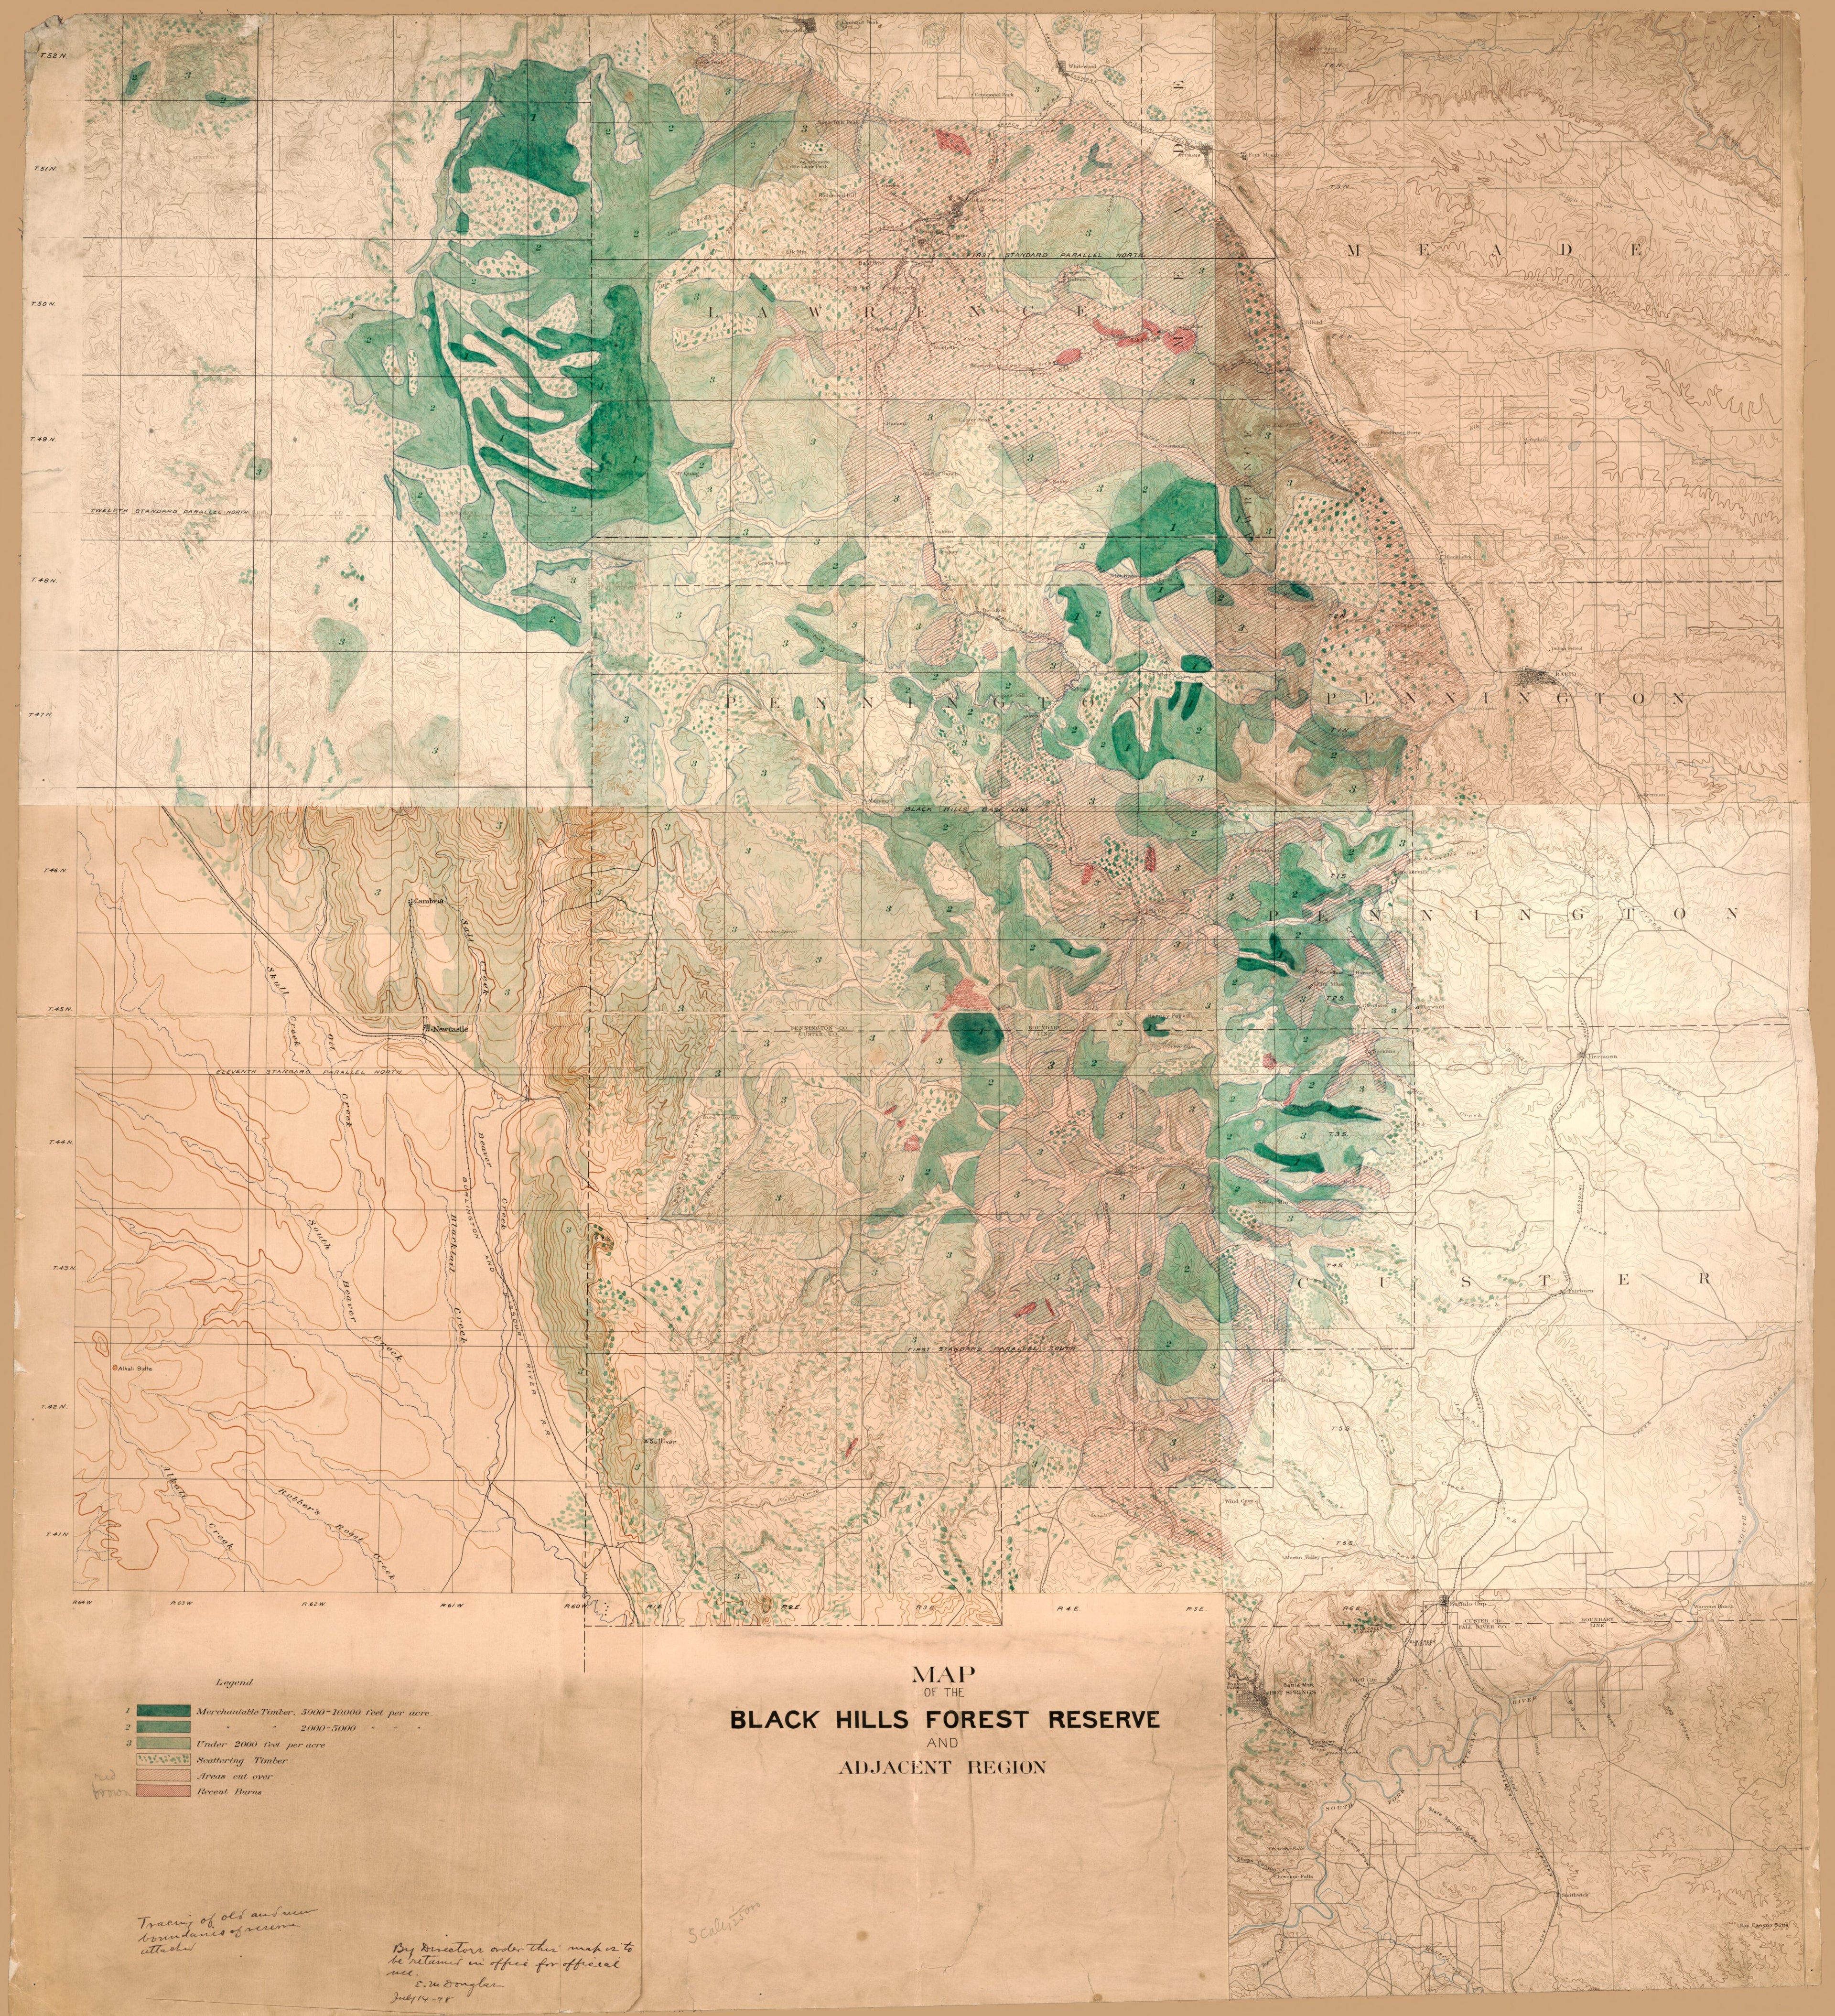 This old map of Map of the Black Hills Forest Reserve and Adjacent Region. (Black Hills Reserve, Timber Map) from 1897 was created by Edward Morehouse Douglas,  Geological Survey (U.S.) in 1897